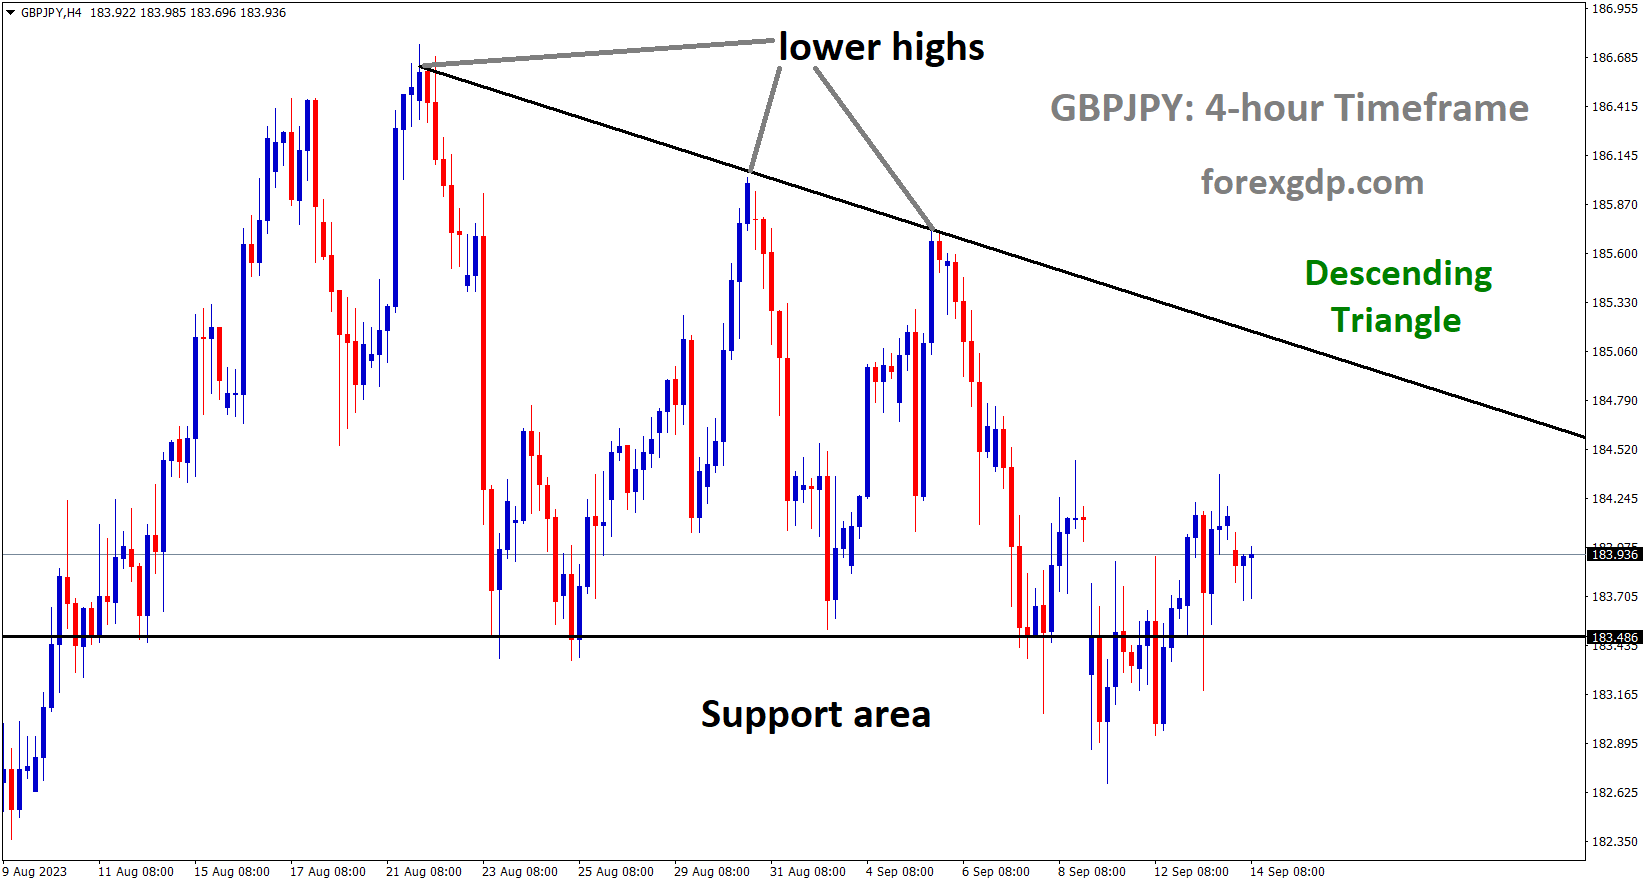 GBPJPY is moving in the Descending triangle pattern and the market has rebounded from the horizontal support area of the pattern